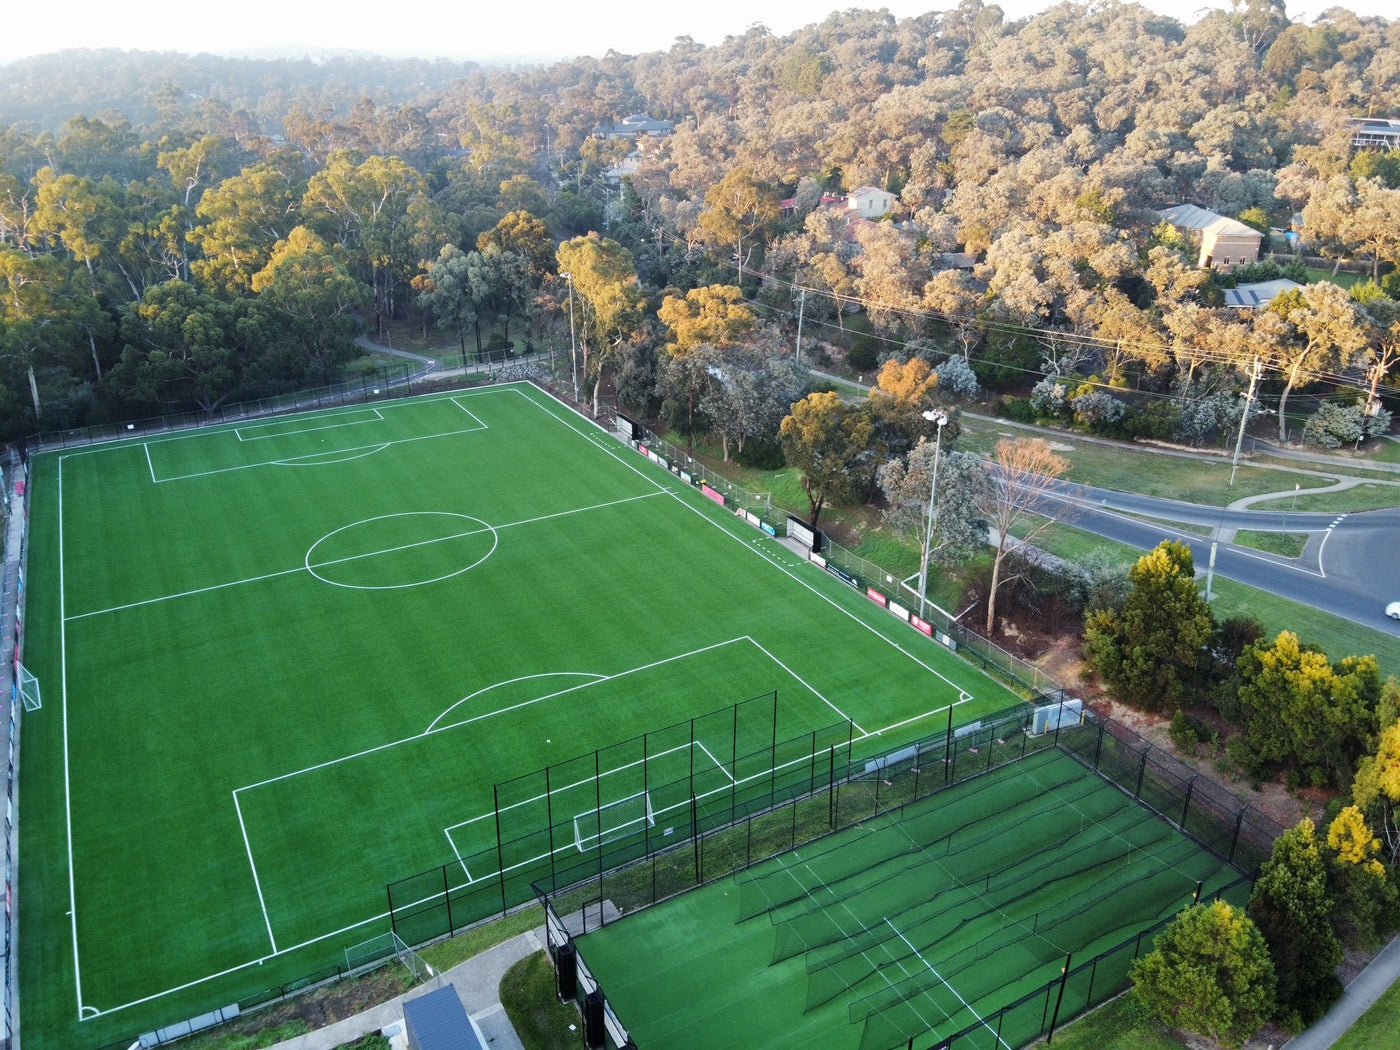 Eltham North FIFA Pitch - Tuff Group, Australia’s leading FIFA Certified commercial sports turf & synthetic grass specialists. 